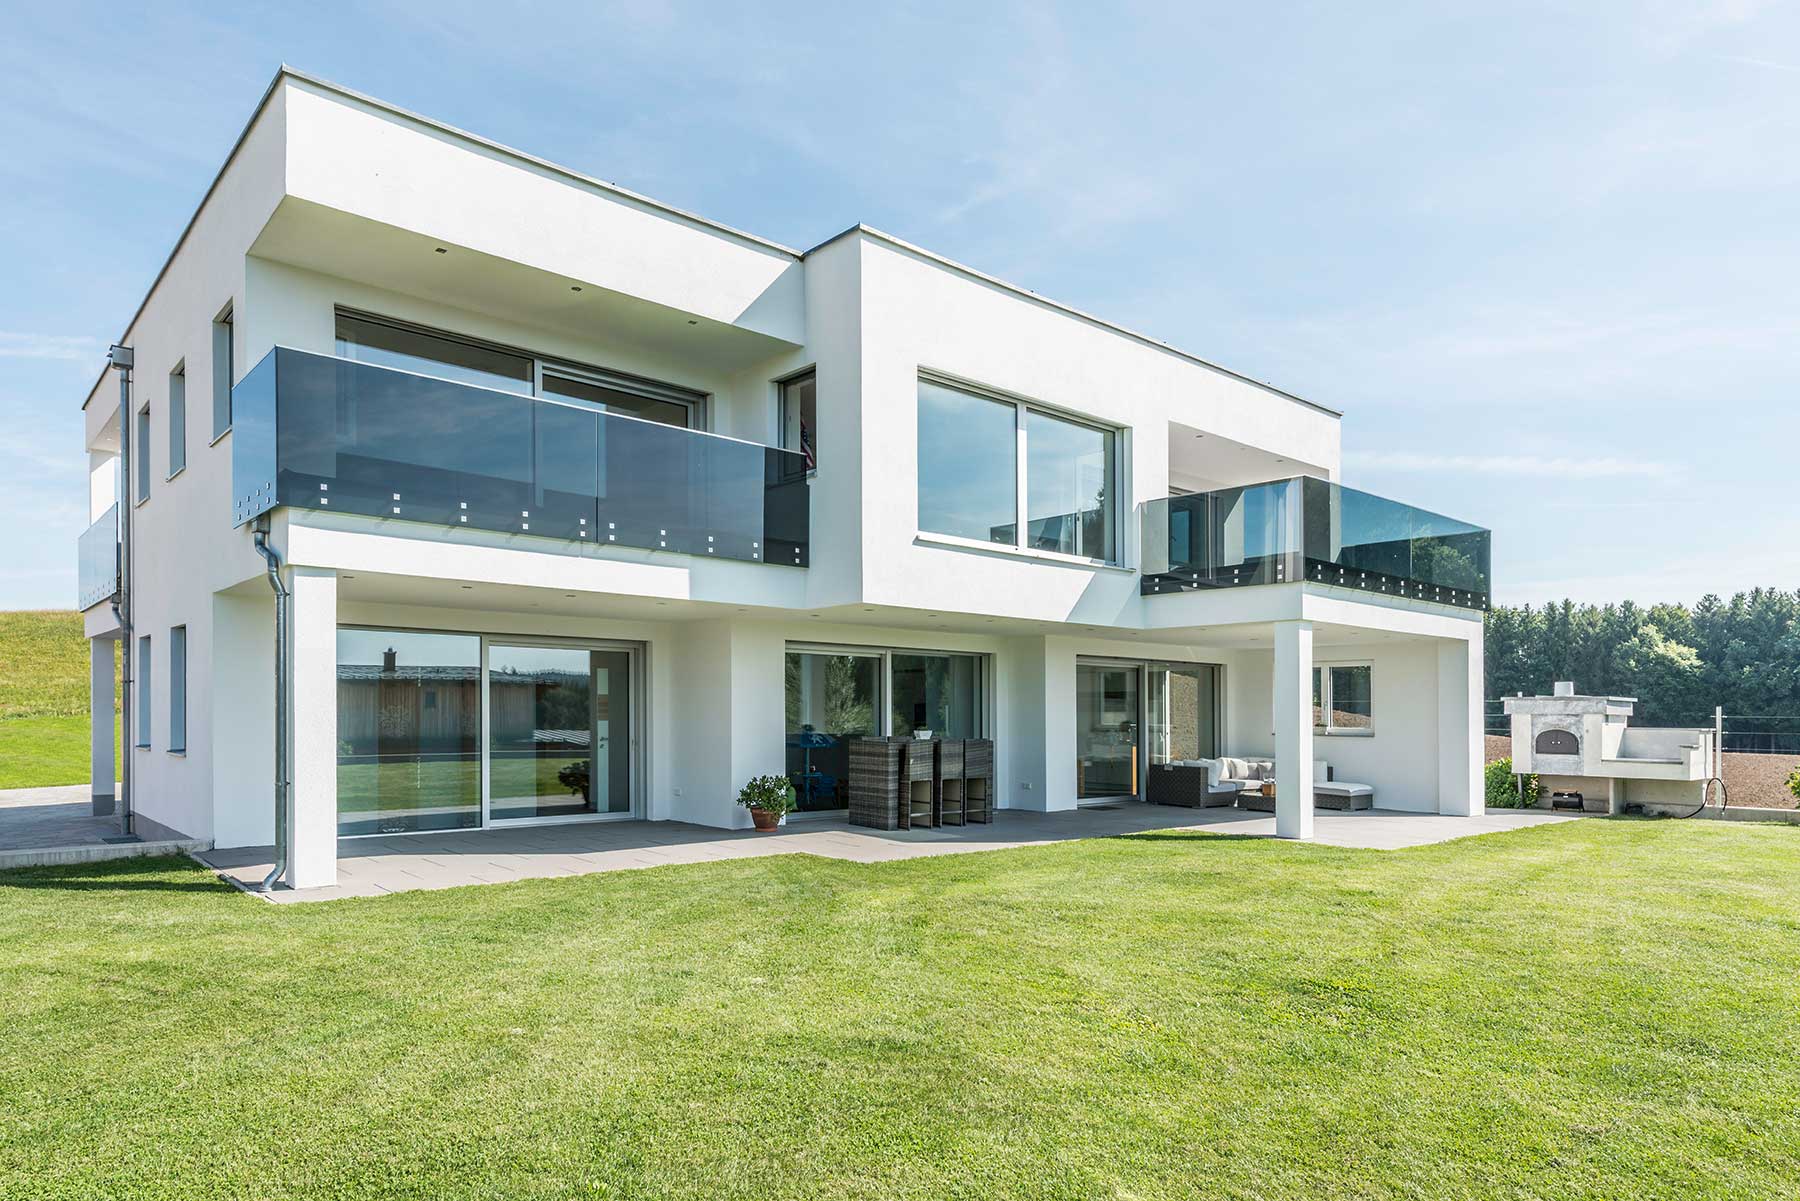 How Energy Efficient are Internorm Windows and Doors?